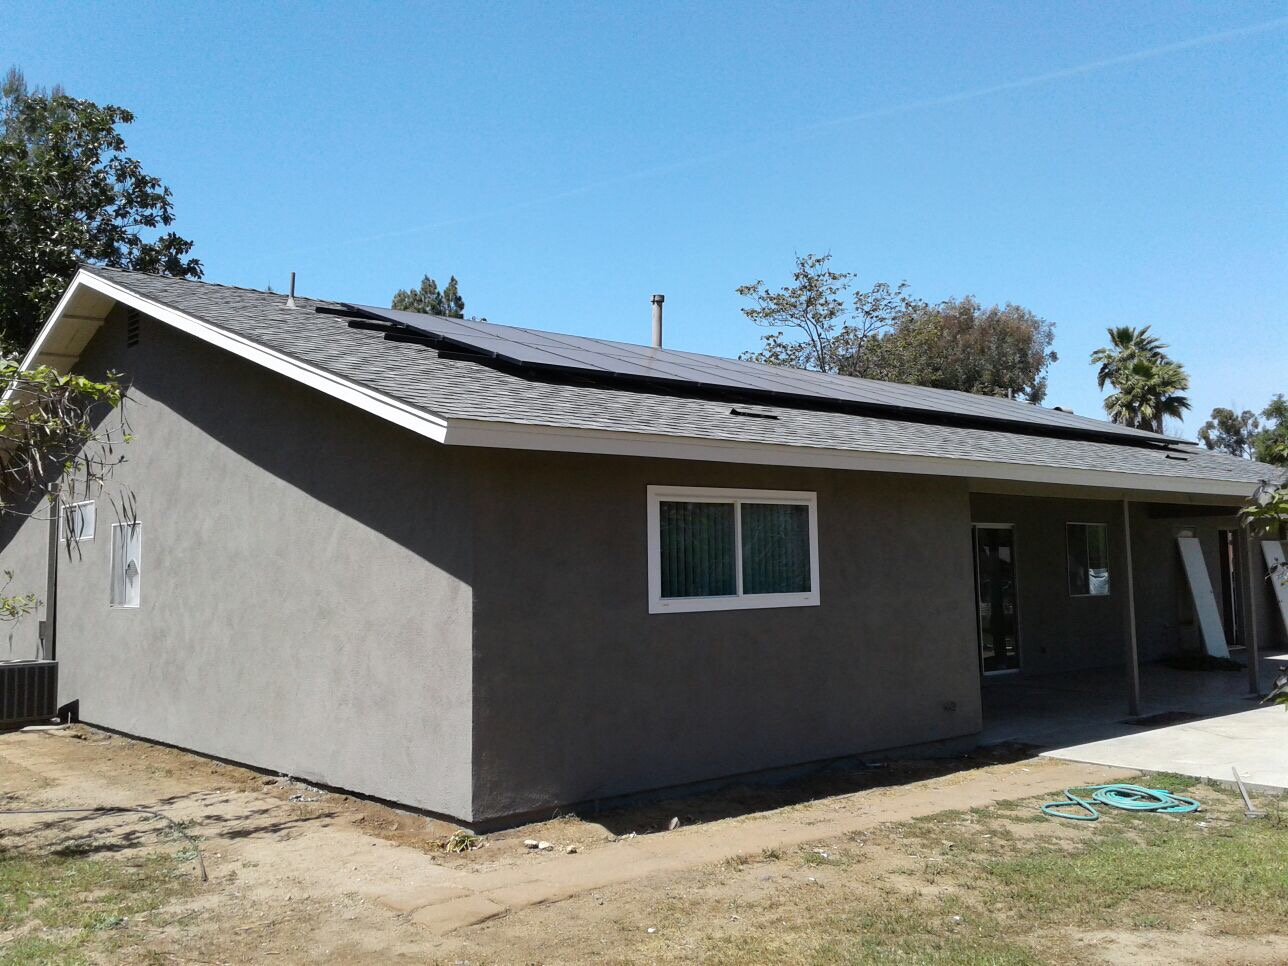 CertaPro Painters the exterior house painting experts in Escondido, CA